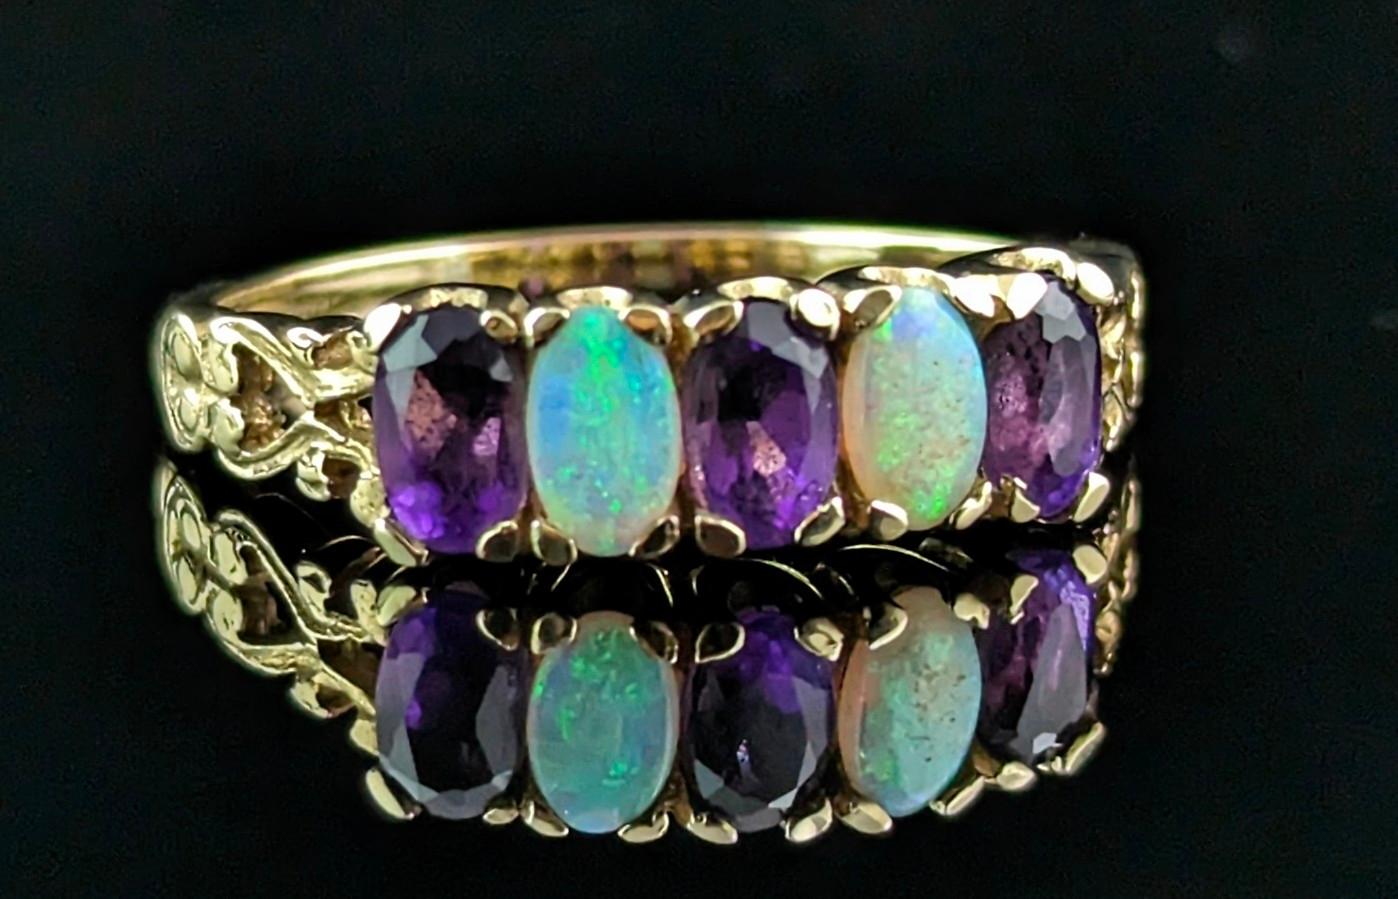 A gorgeous and vibrant vintage opal and Amethyst five stone ring.

It is a half hoop style ring in rich 9ct yellow gold with decorative heart design shoulders and a slender band.

The face of the ring is set with alternating Opals and Amethysts,